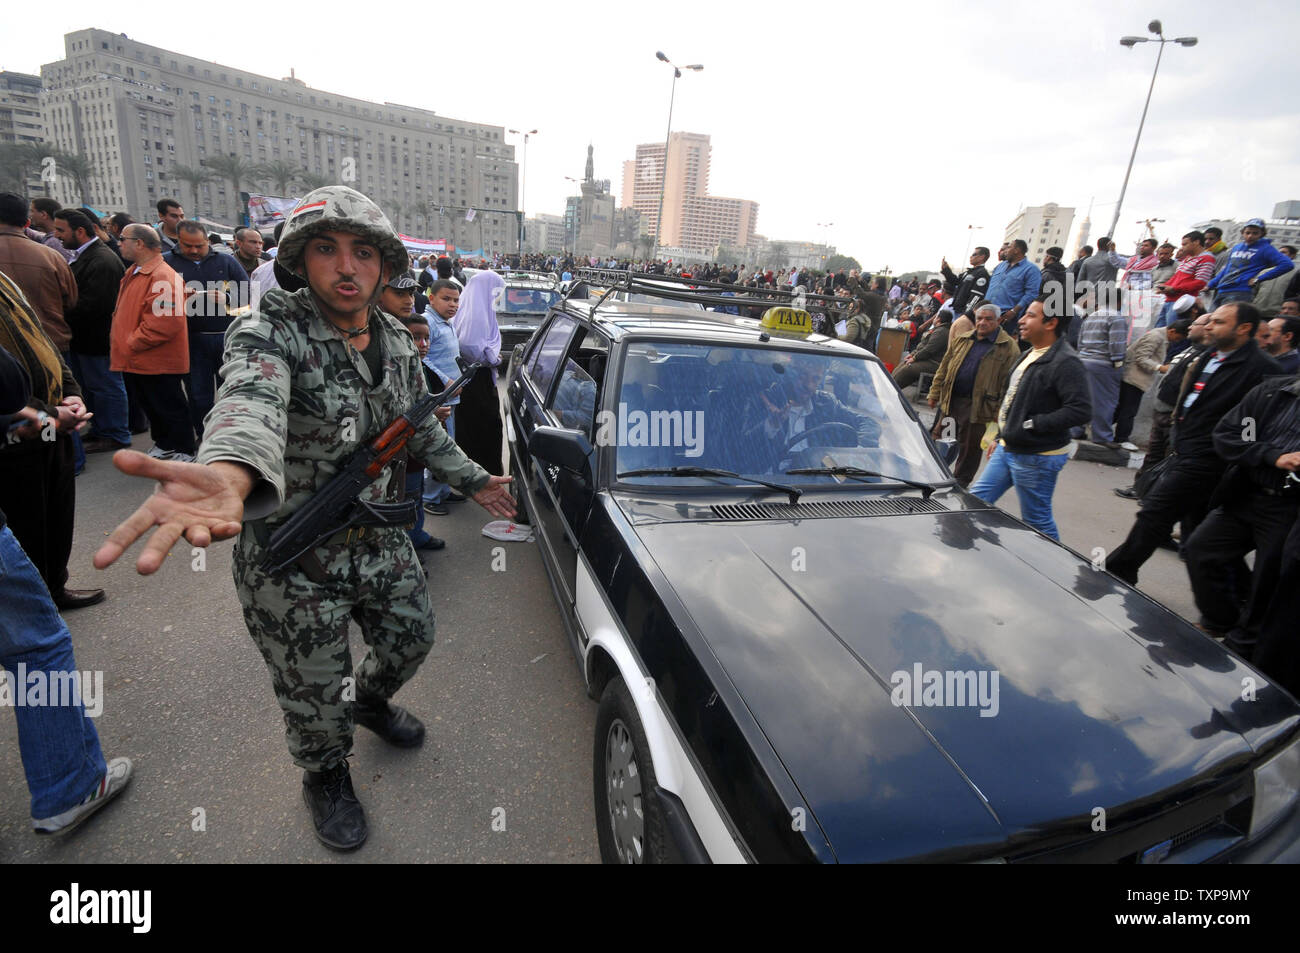 Egyptian soldiers keep traffic moving in Egypt's Tahrir Square, as most protester have packed up and gone home following the 18-day stand off which led to the resignation of President Hosni Mubarak following his 30 year rule, February 13, 2011. UPI Stock Photo